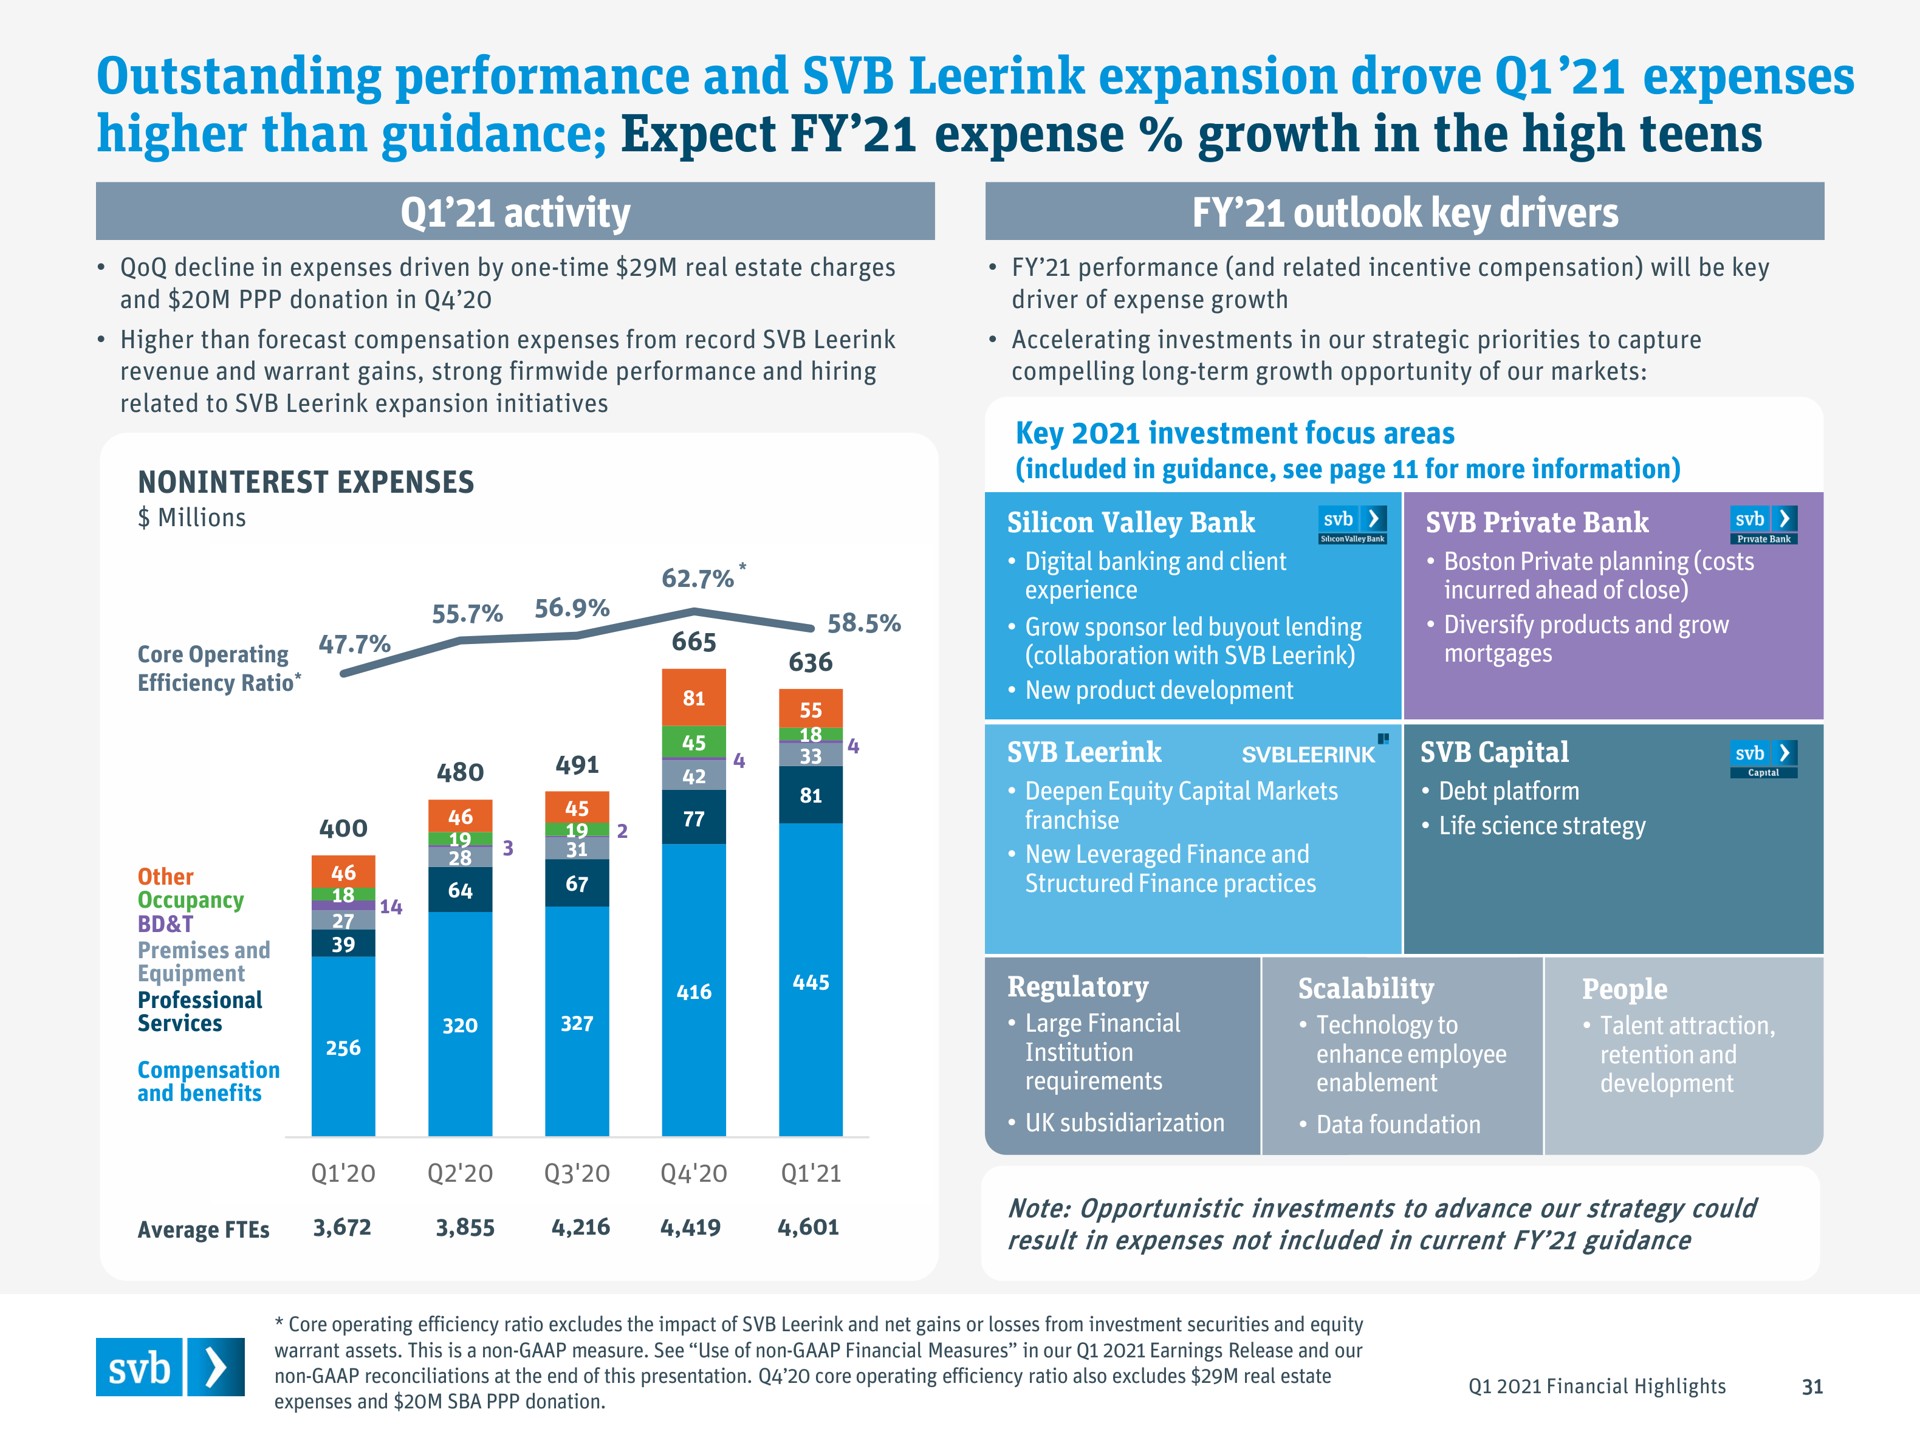 outstanding performance and expansion drove expenses higher than guidance expect expense growth in the high teens outlook key drivers | Silicon Valley Bank